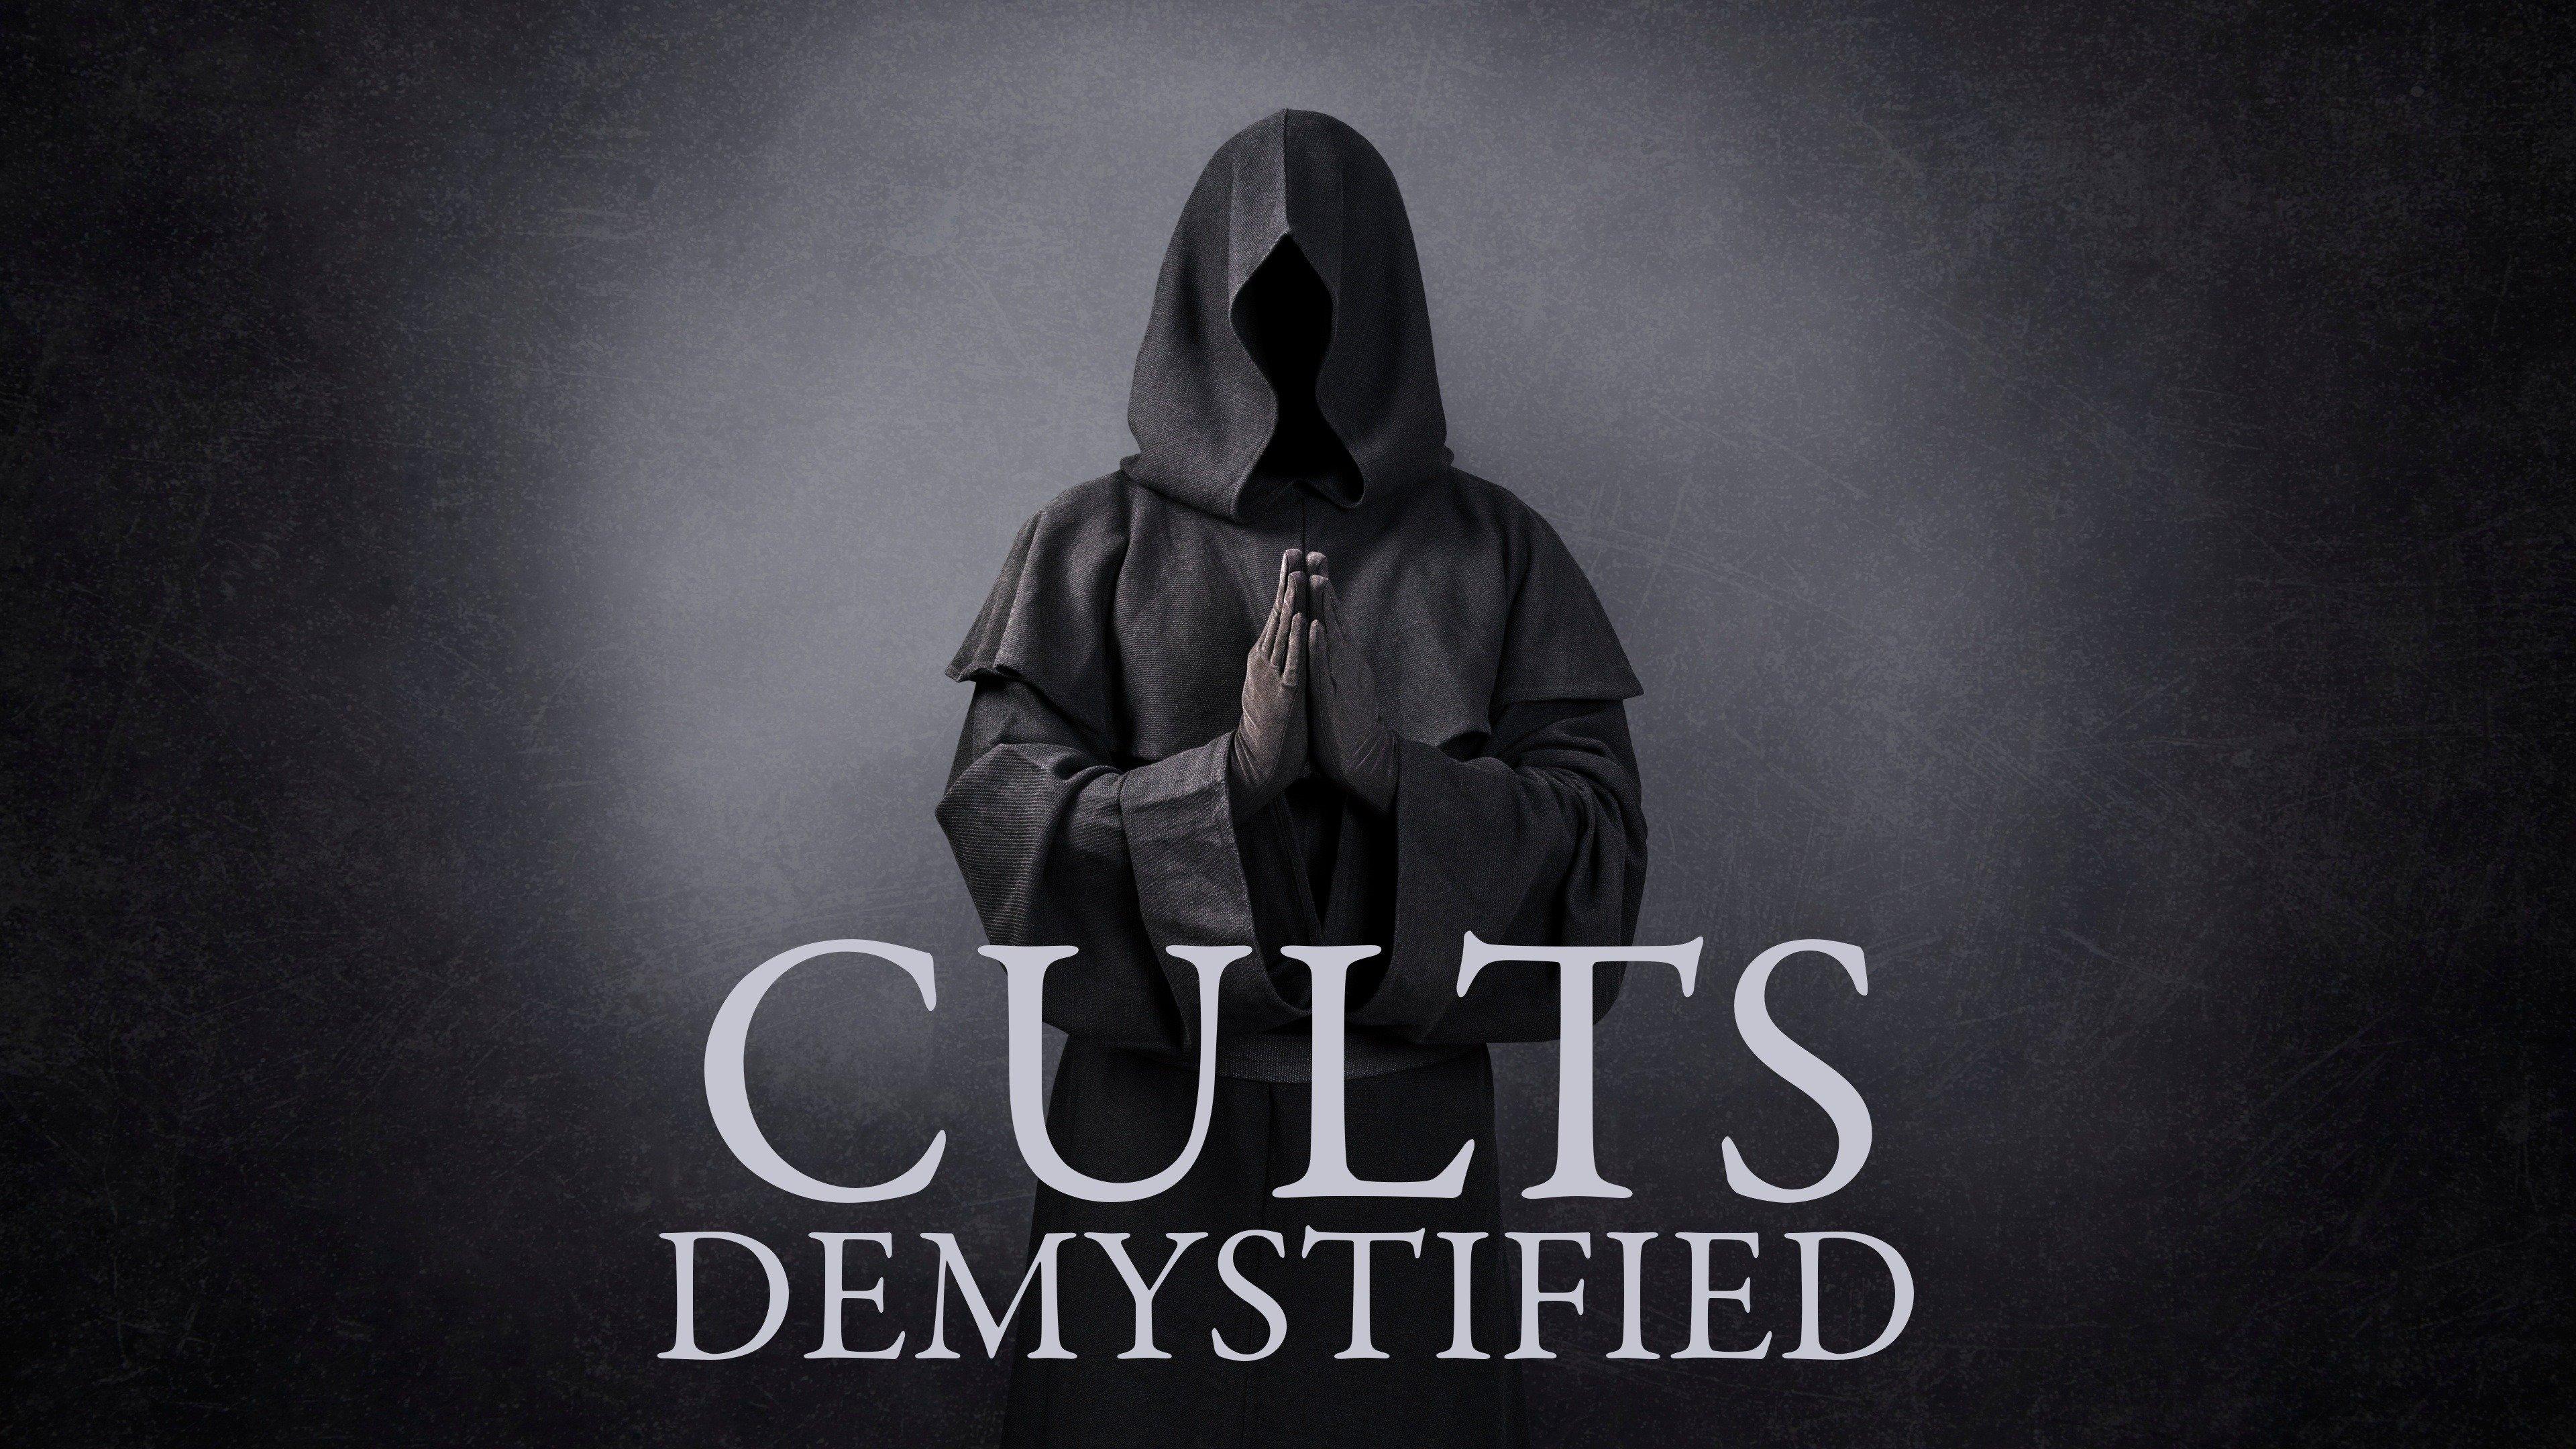 Watch Cults: Demystified Streaming Online on Philo (Free Trial)